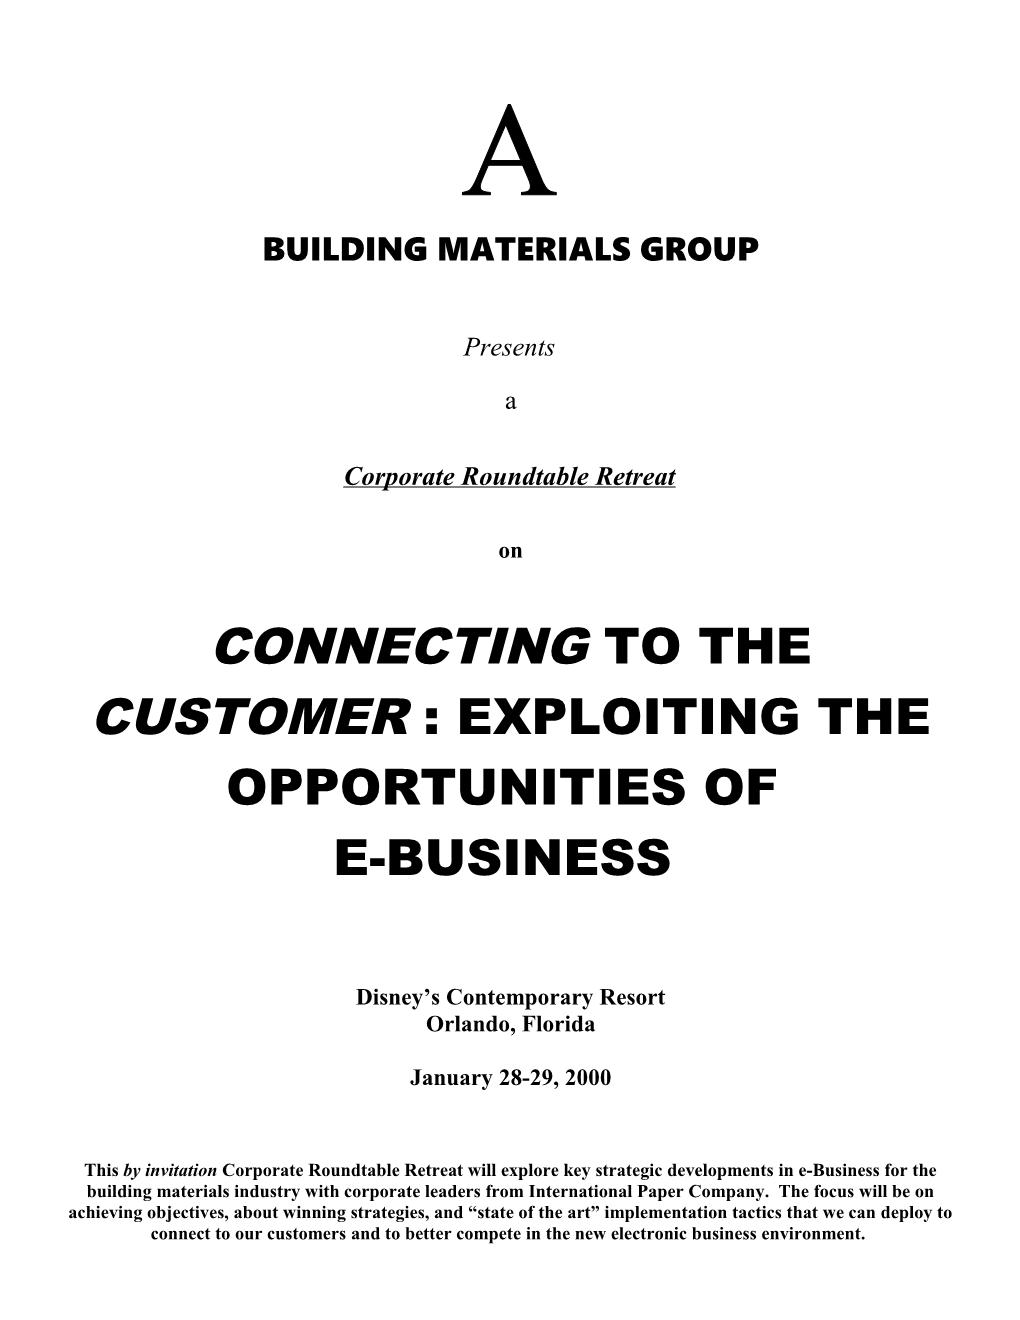 Building Materials Group